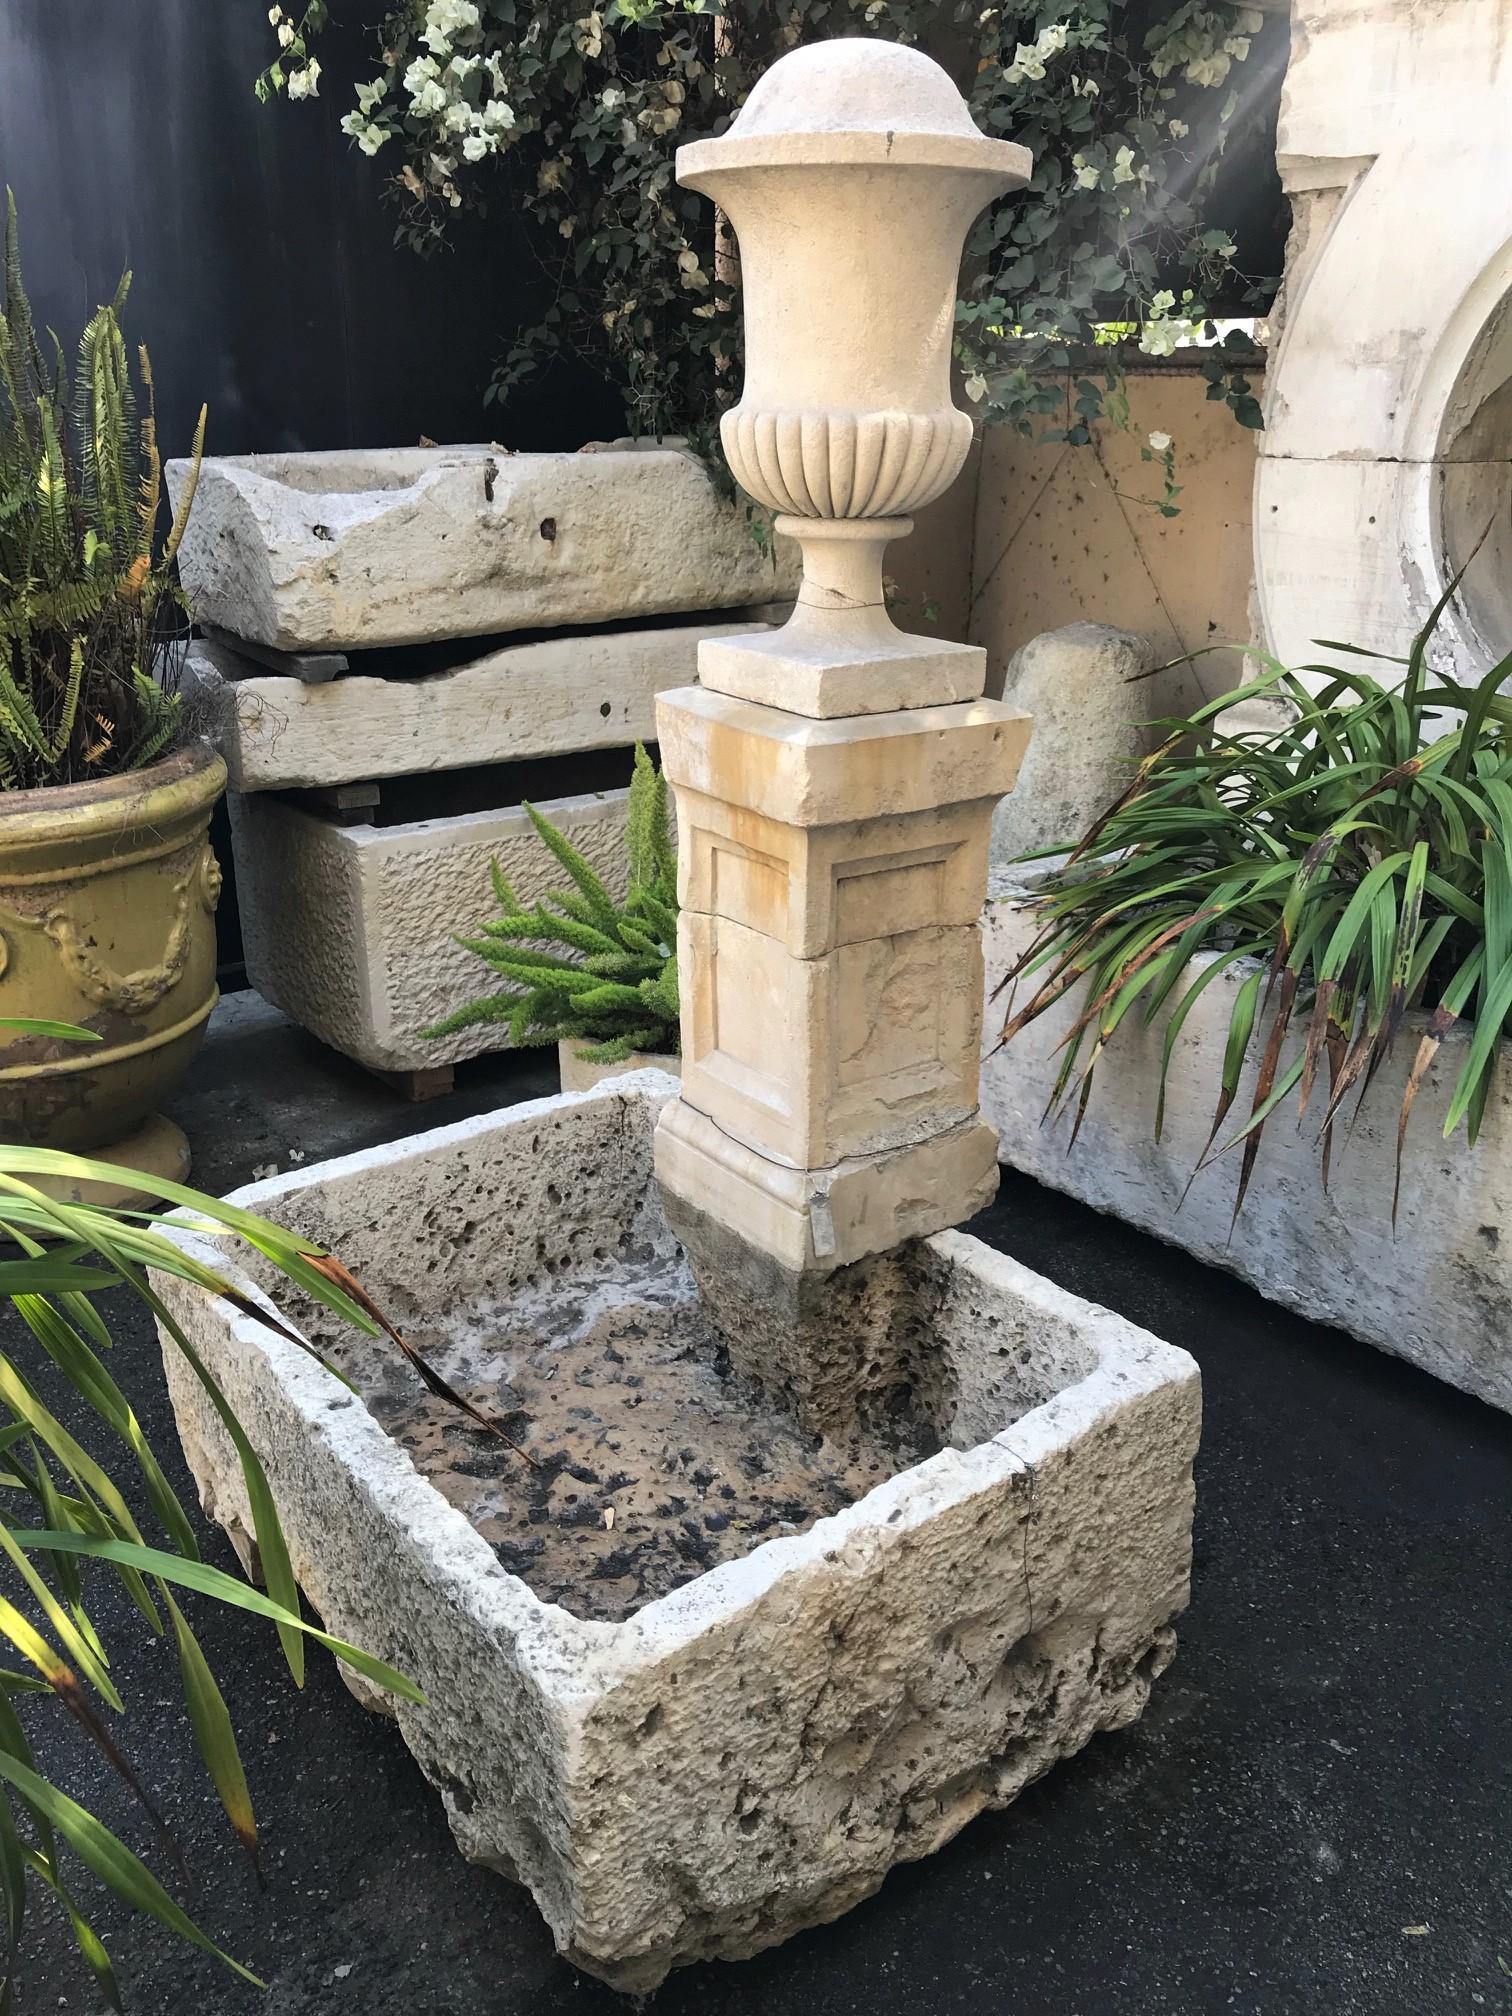 Hand carved stone container trough farm sink fountain basin antiques LA Fire pit 18th century exquisite water fountain basin of hand carved stone Lavoir. This trough could be installed with a simple bronze spout or a carved stone fountain head, we